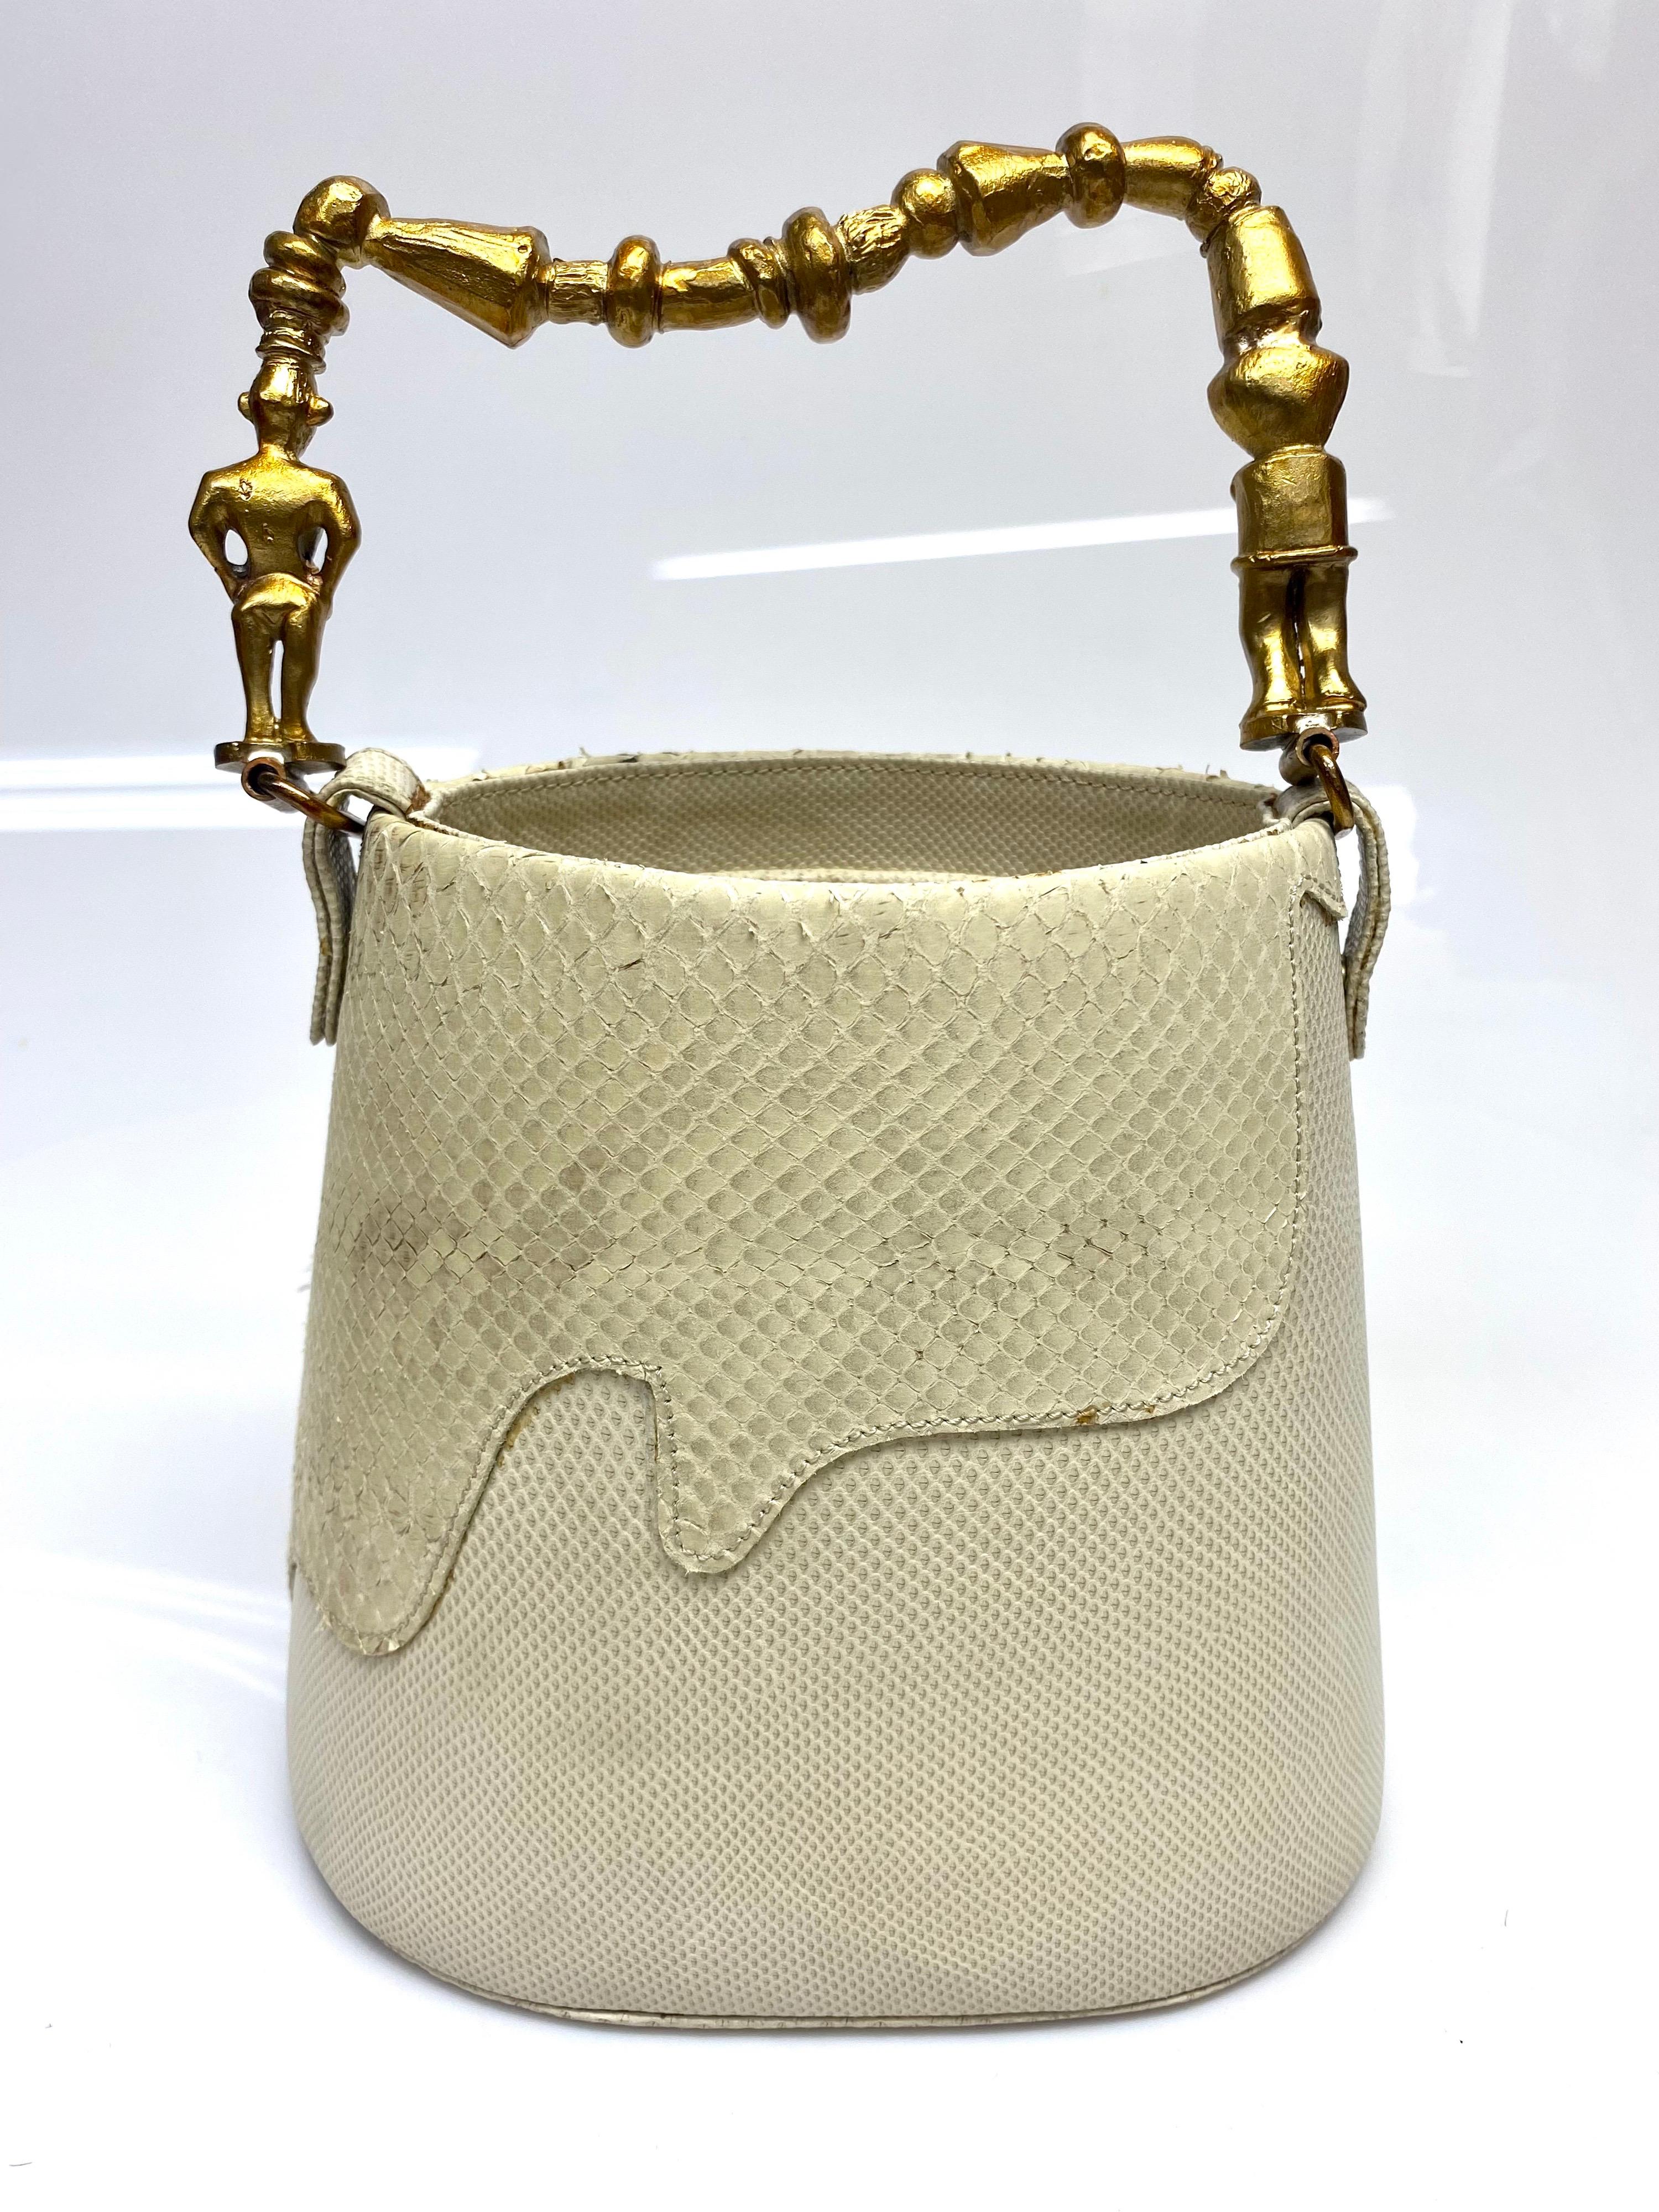 This standout piece from Roberta Balsamo is truly iconic. This bag was made for my client and is one of a kind. The bag is Lizard/snakeskin featuring brown and blue rhinestones decorating the handle. This item is in fair condition with signs of wear